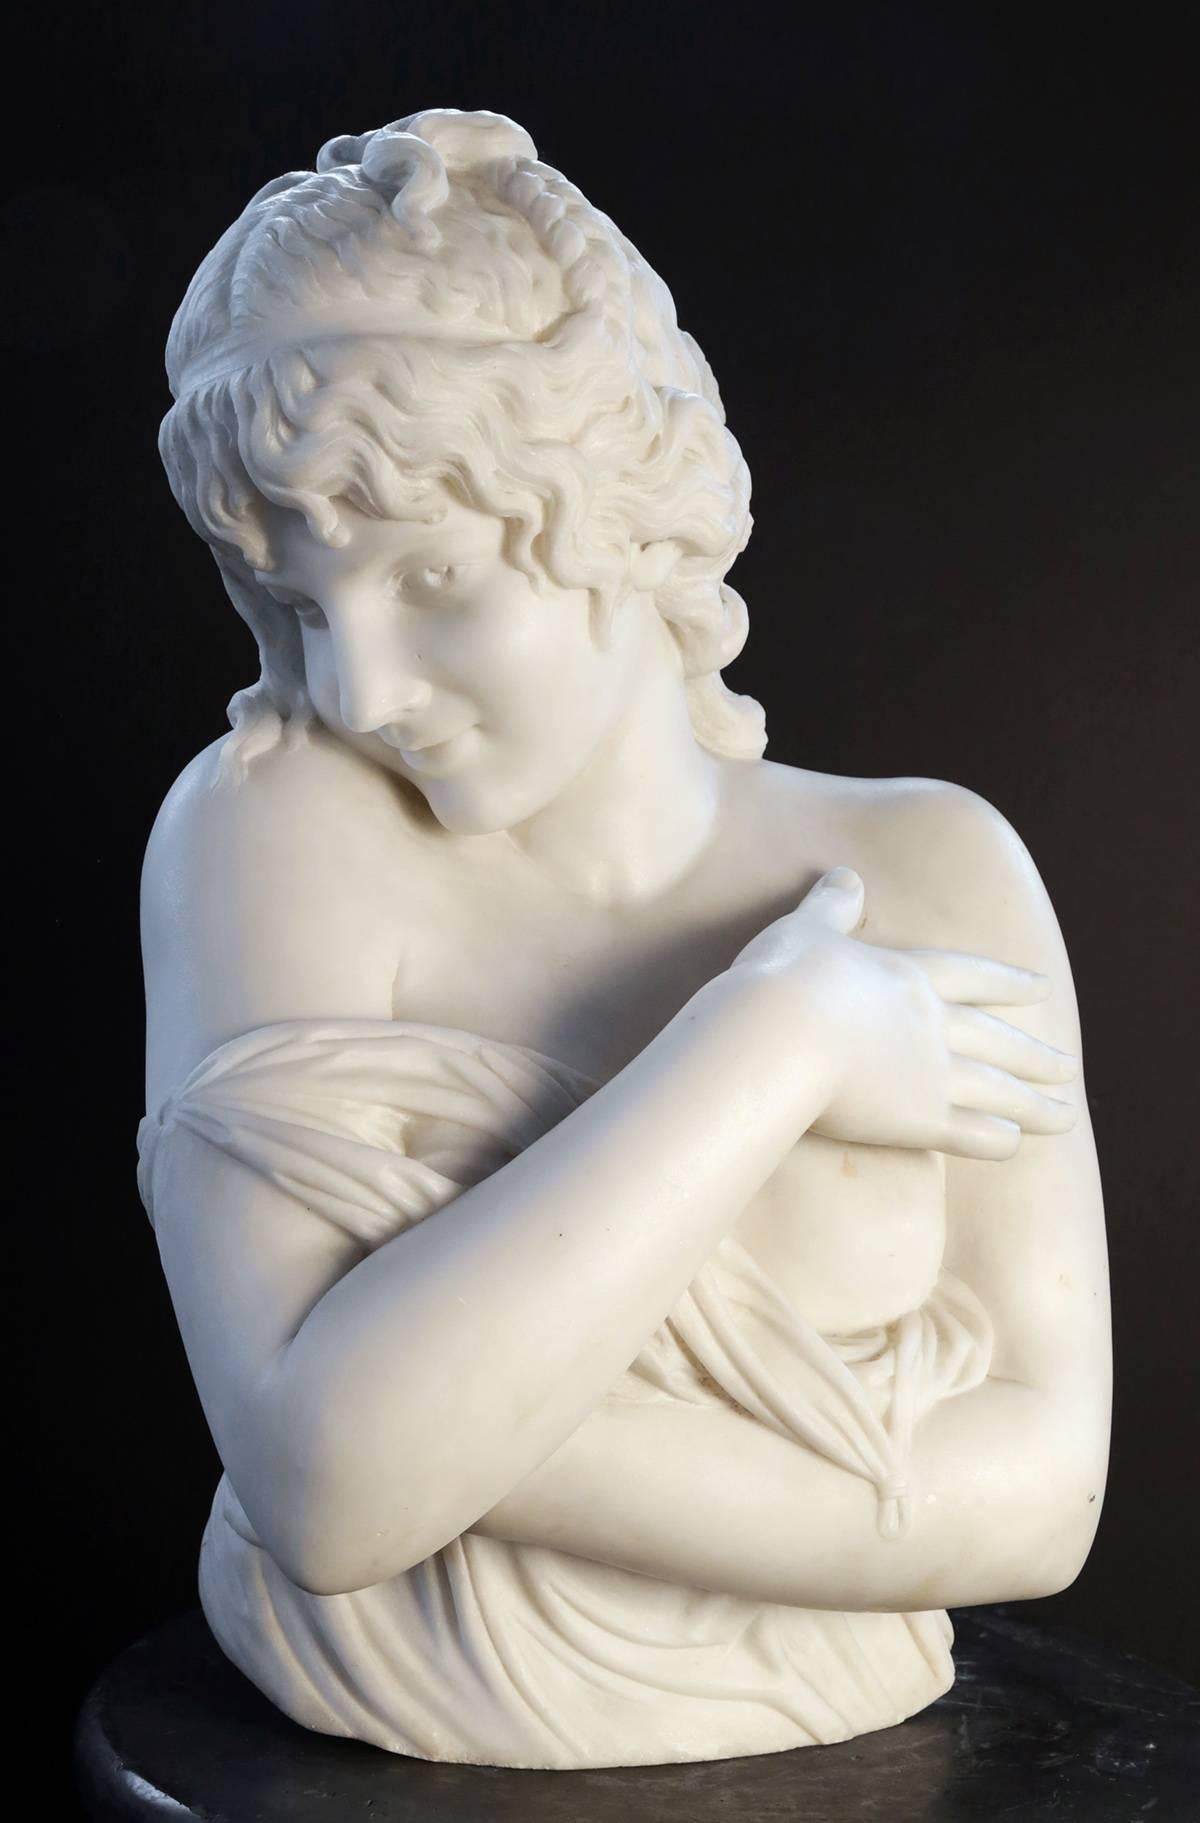 Pieter Barranti Figurative Sculpture - A Carved Marble Bust of a Demure Young Girl